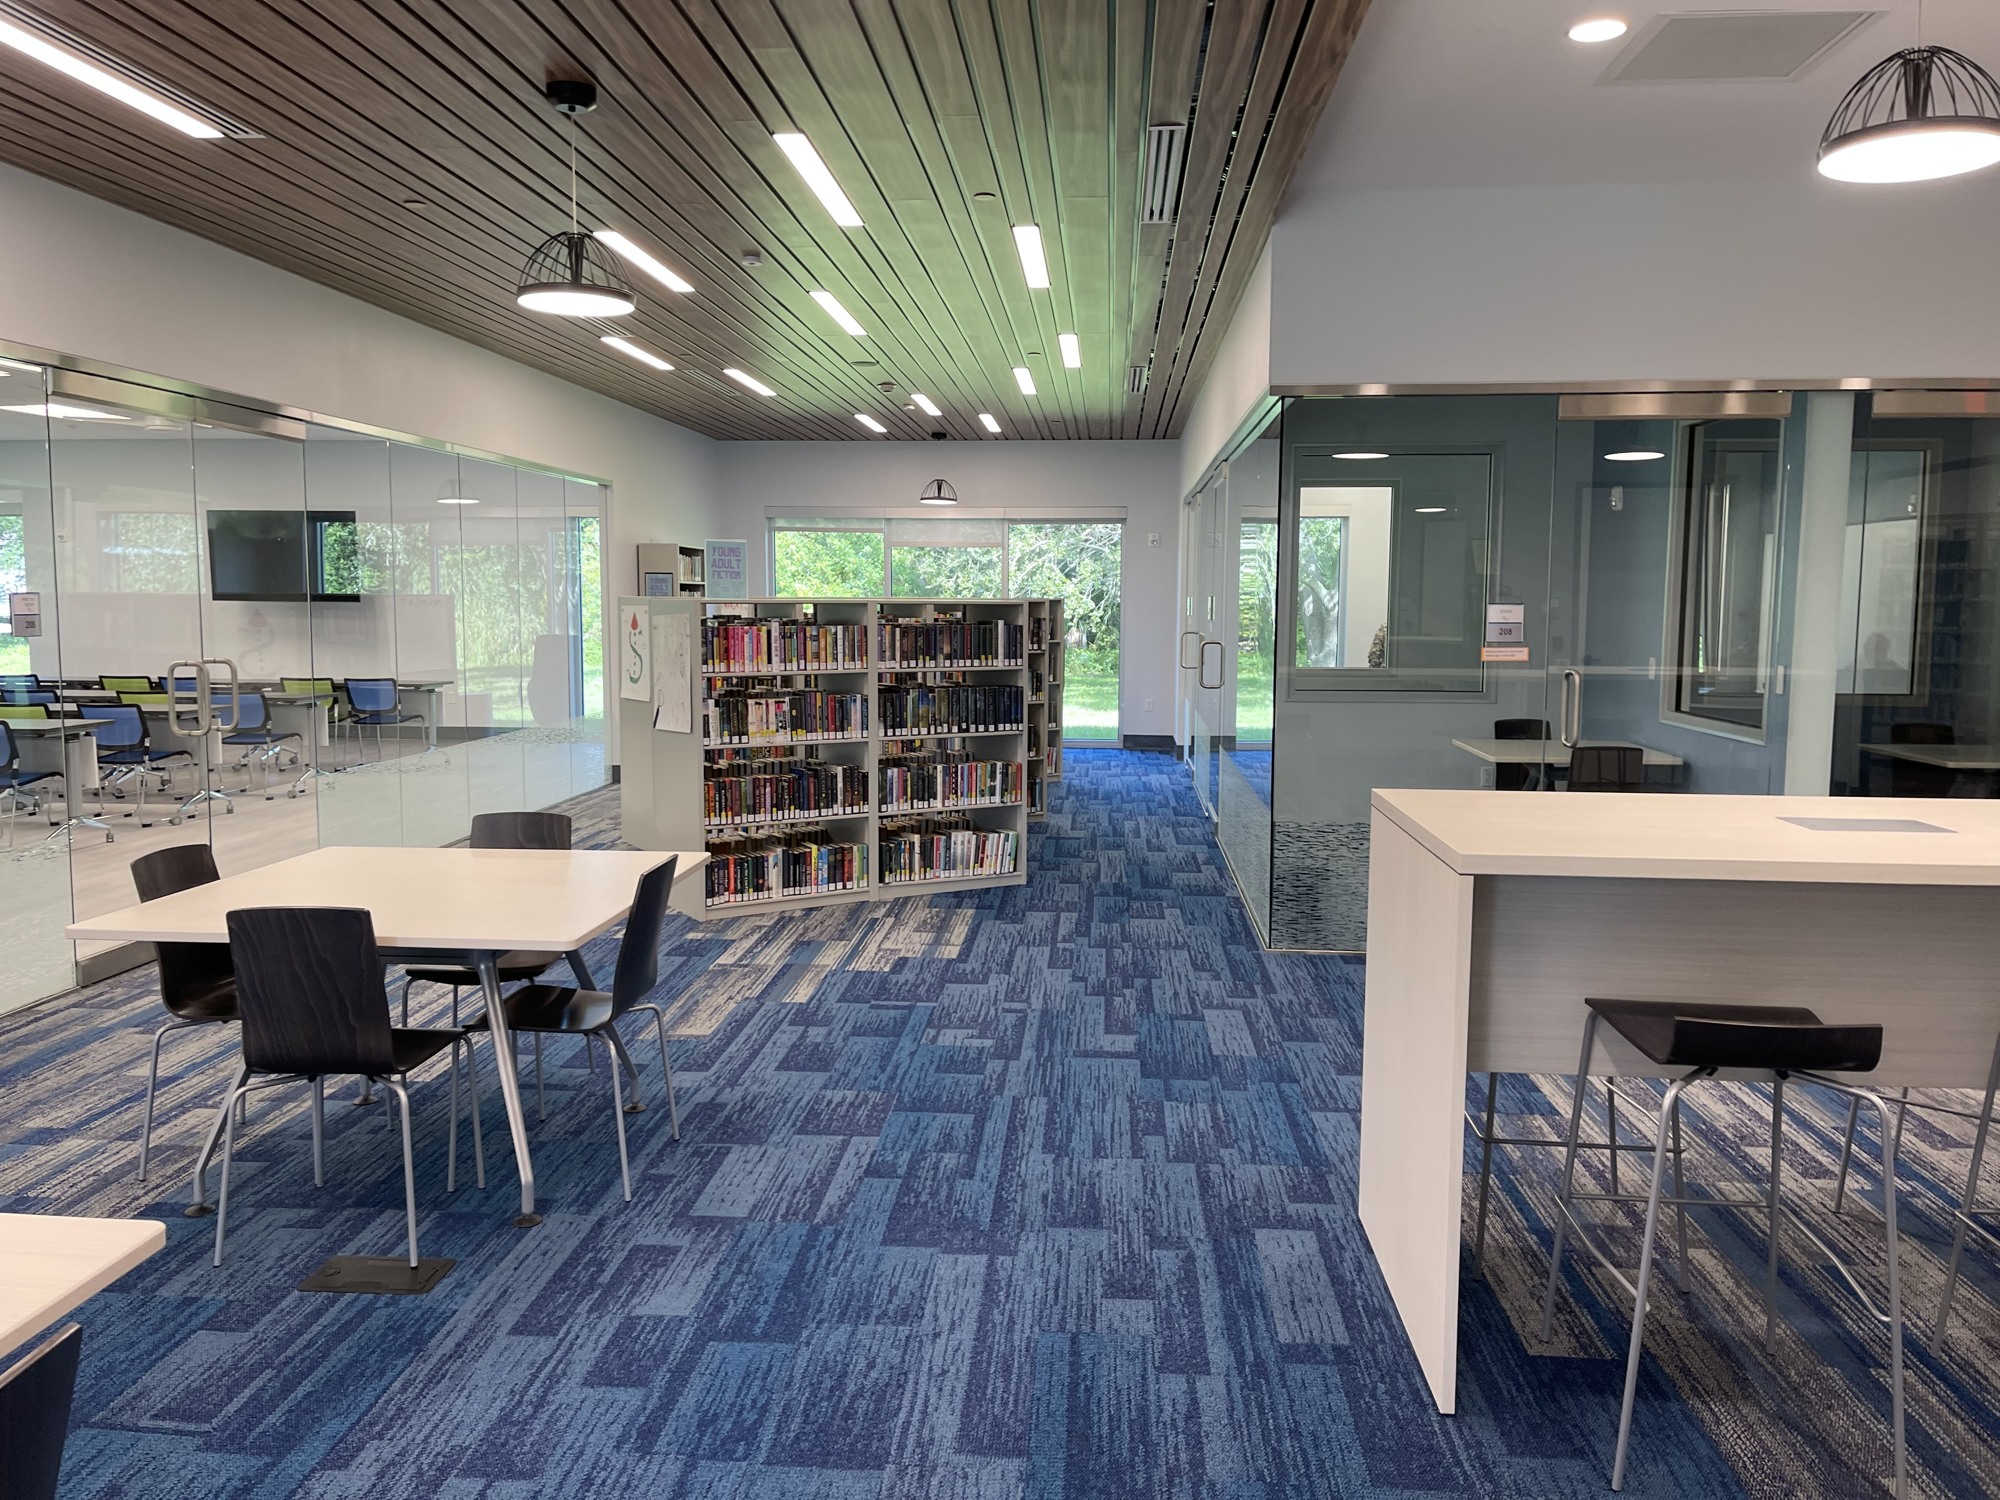 A view of the 4,250 square foot Braden River Library expansion that includes a Makerspace, a 30-seat conference room, four study rooms, more display space for books, reading space and a staff office.